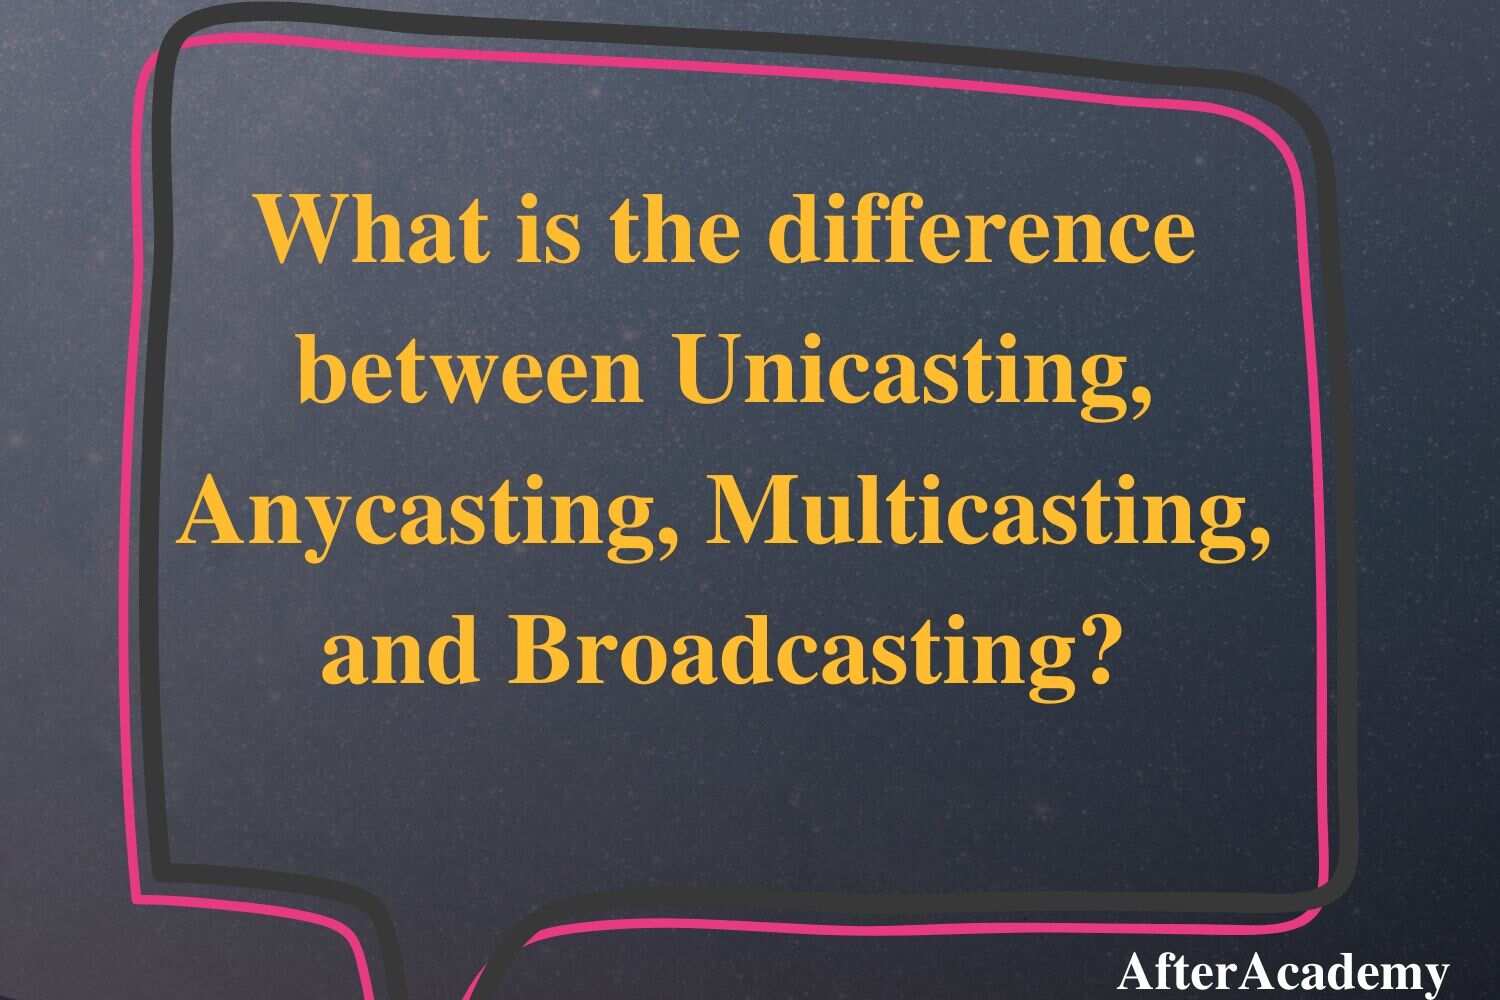 What is the difference between Unicasting, Anycasting, Multicasting, and Broadcasting?